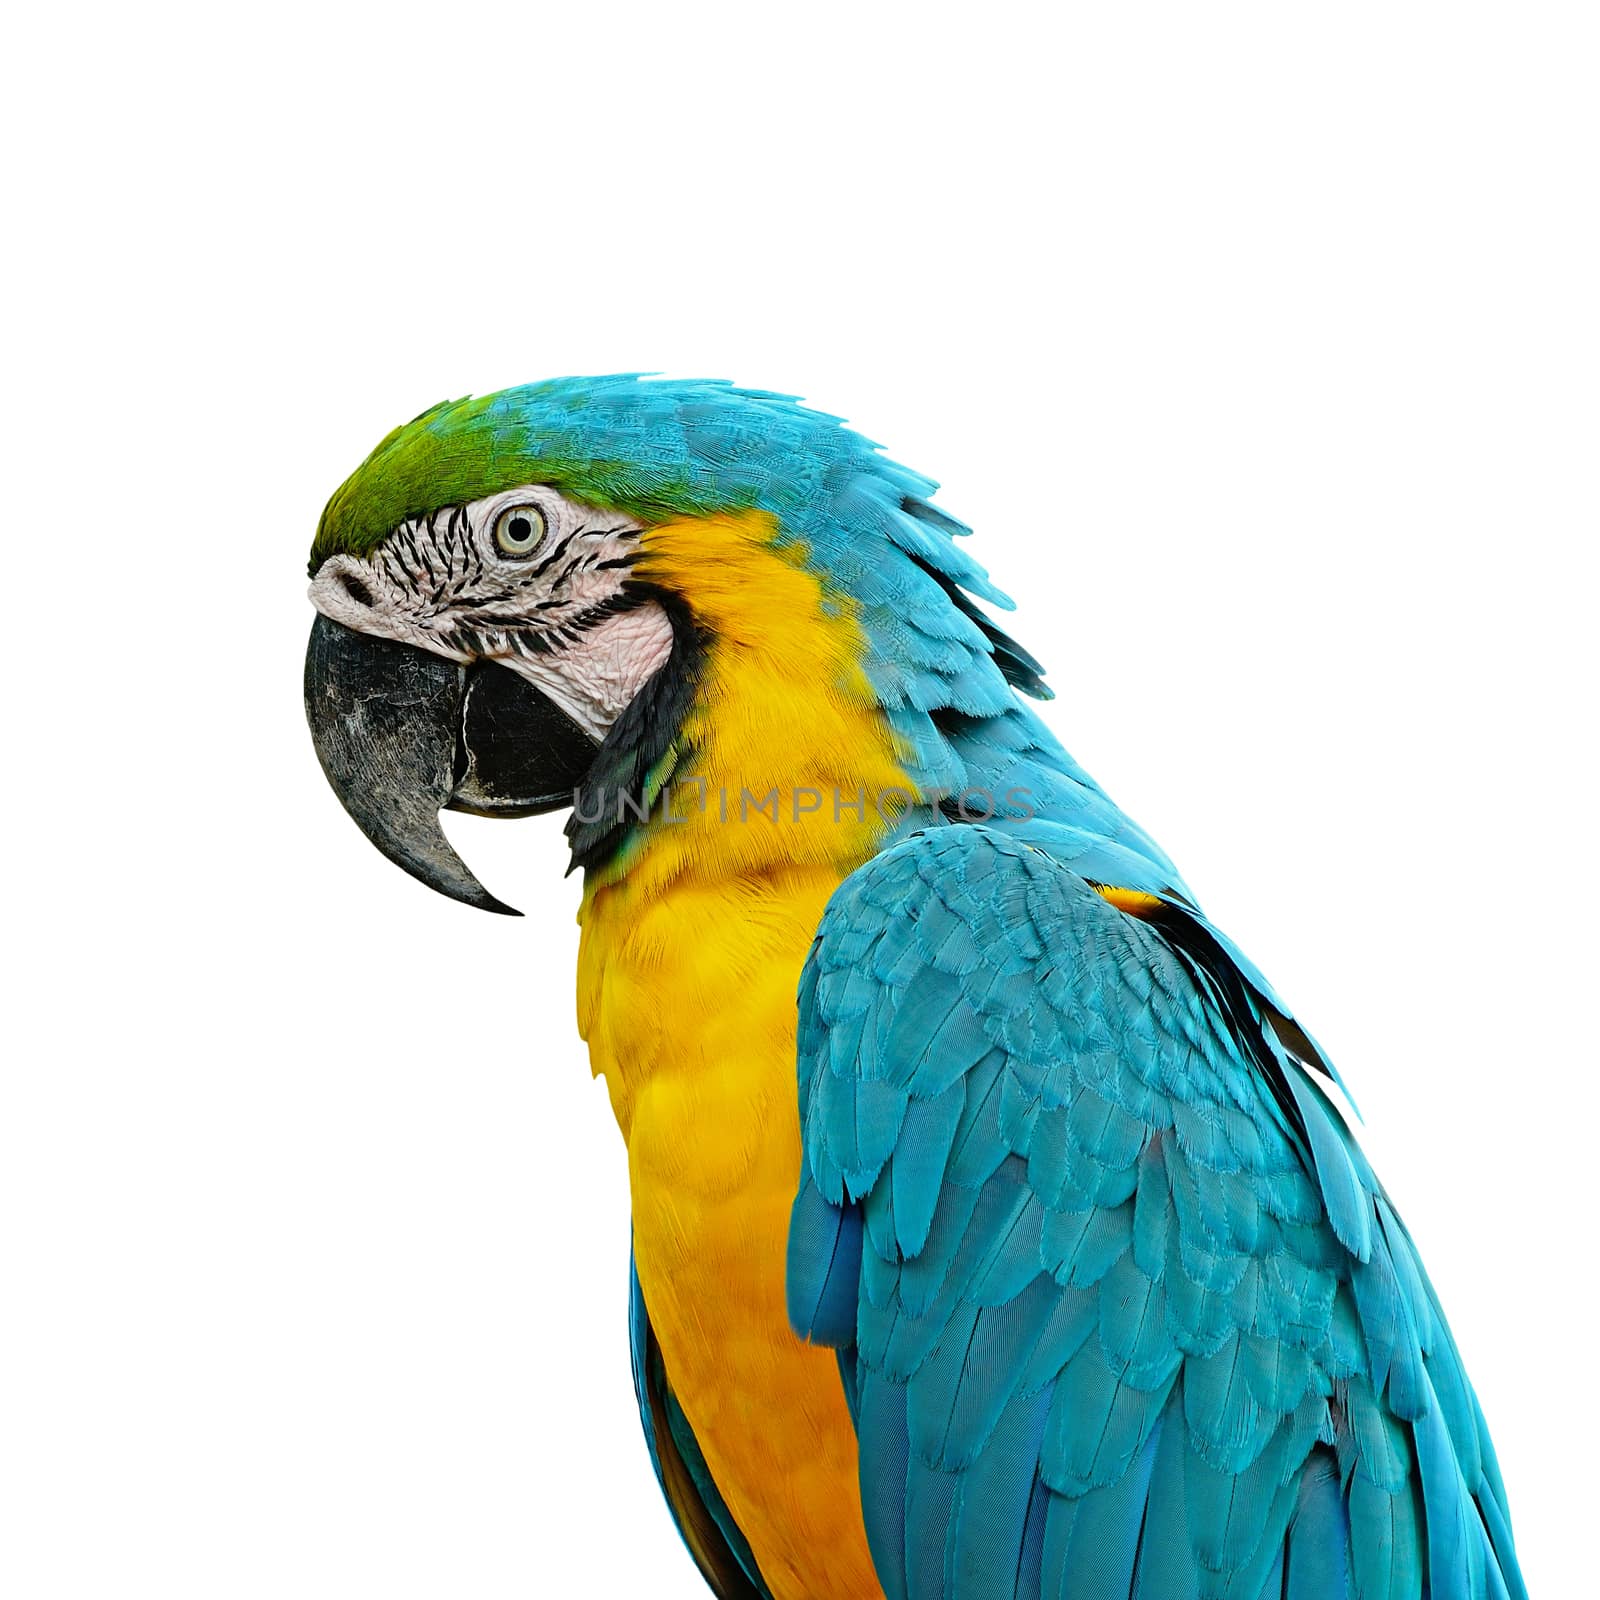 Blue and Gold Macaw by panuruangjan